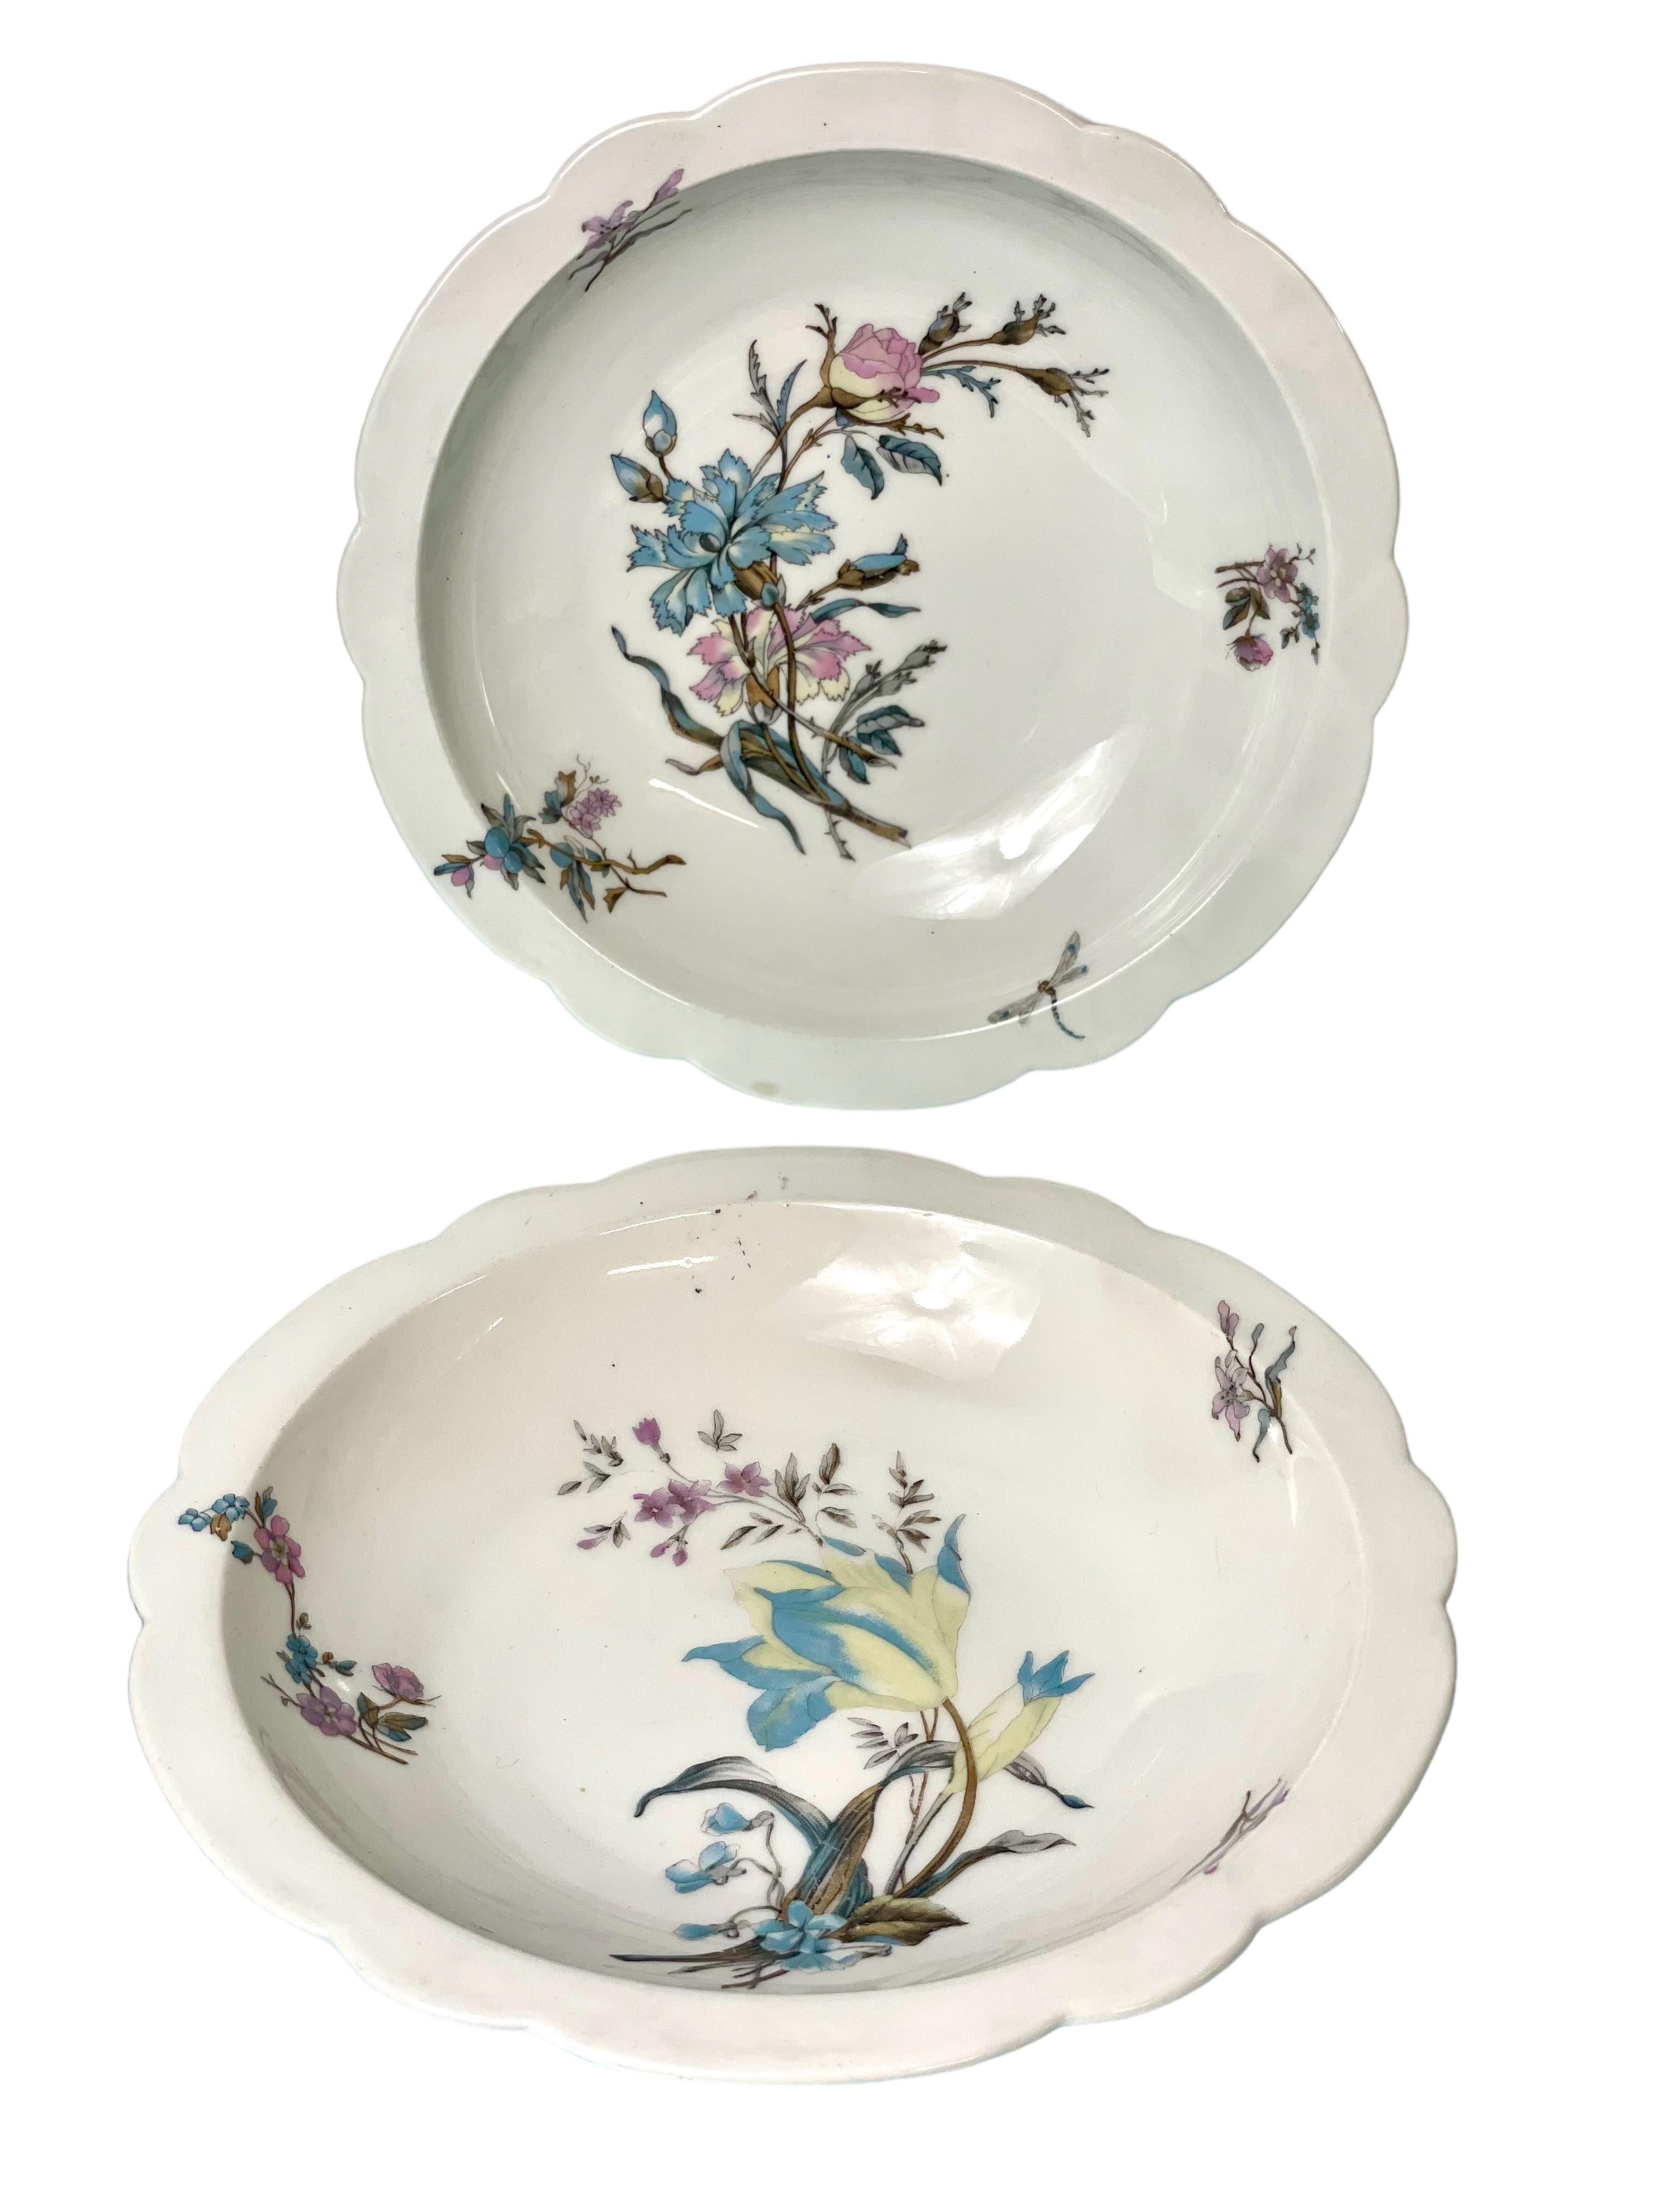 102-Piece Porcelain Dinner Service with Flowers and Butterflies 6